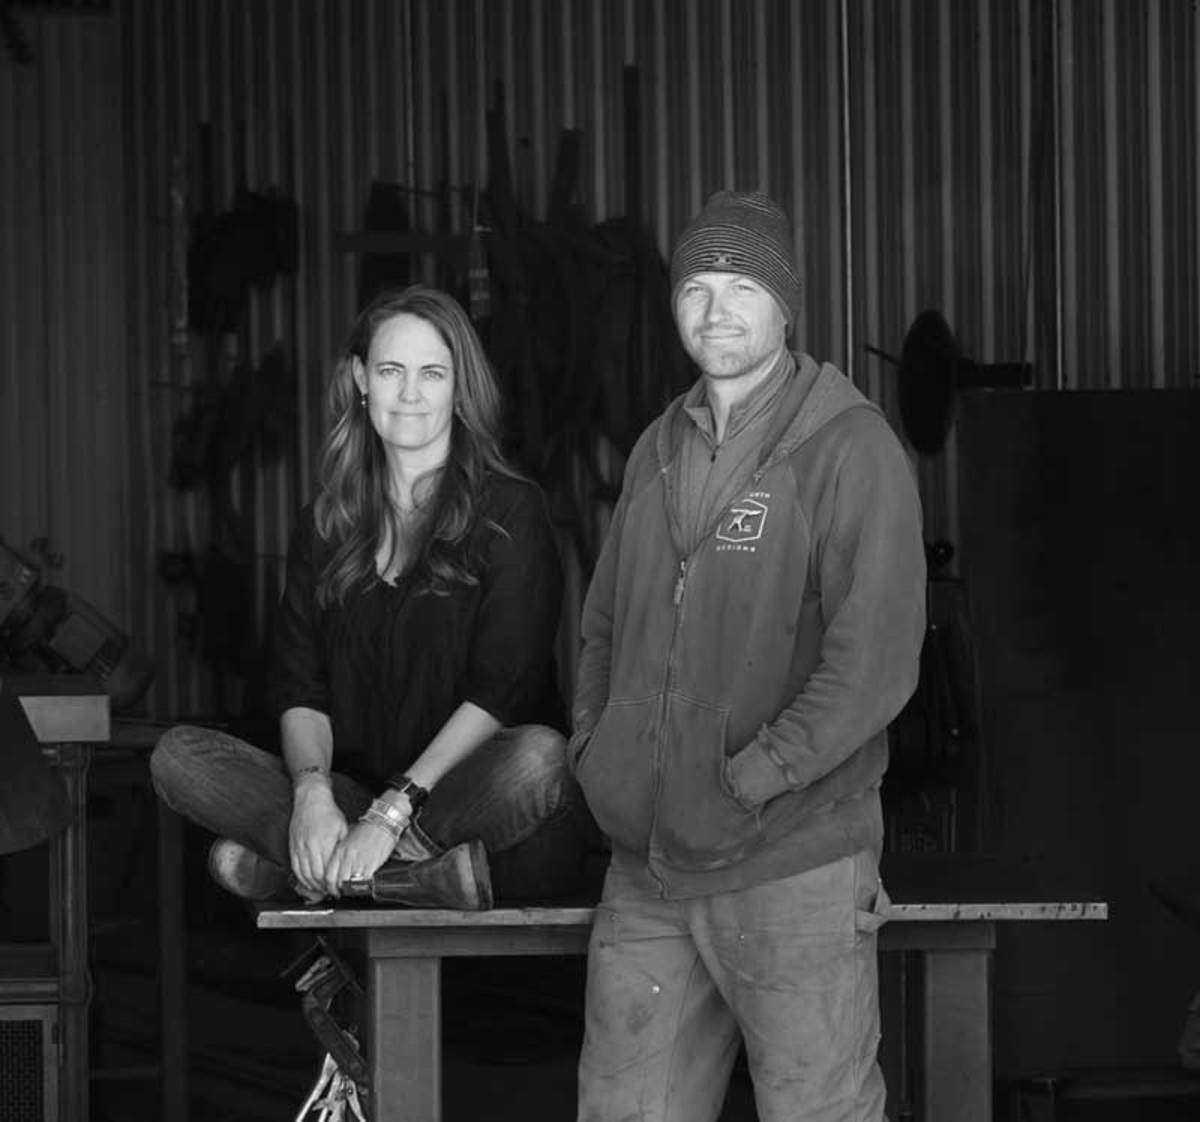 Amy and Stefan Sasick transitioned from landscape to metalwork design as part of a search for a more fulfilling life.